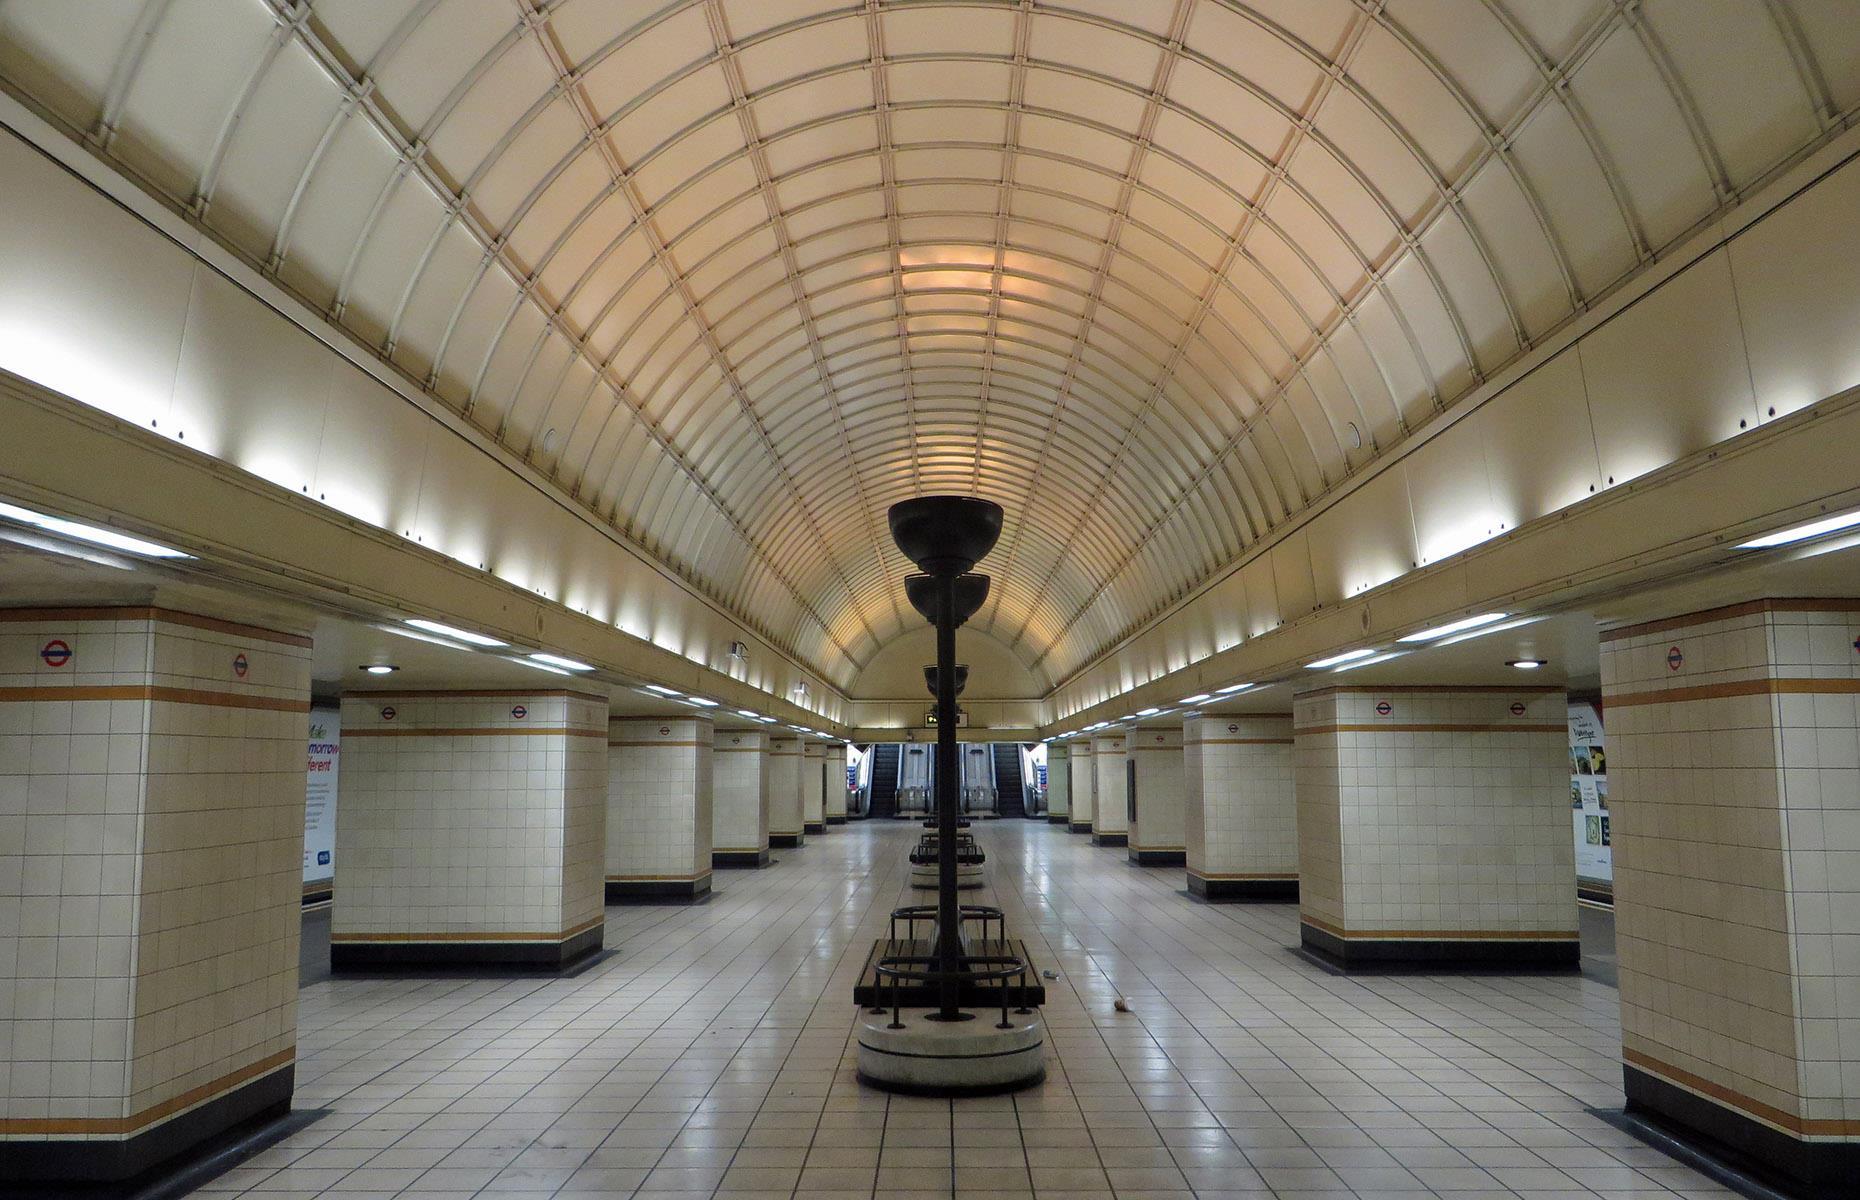 But perhaps some of the least appreciated stations are the ones beyond Zone 1. Think beautiful Art Deco exteriors and interiors of East Finchley and Gants Hill (pictured). Or Cockfosters – a terminus that’s full of architectural peculiarities like angled air vents and arches replicating the shape of a tube carriage.